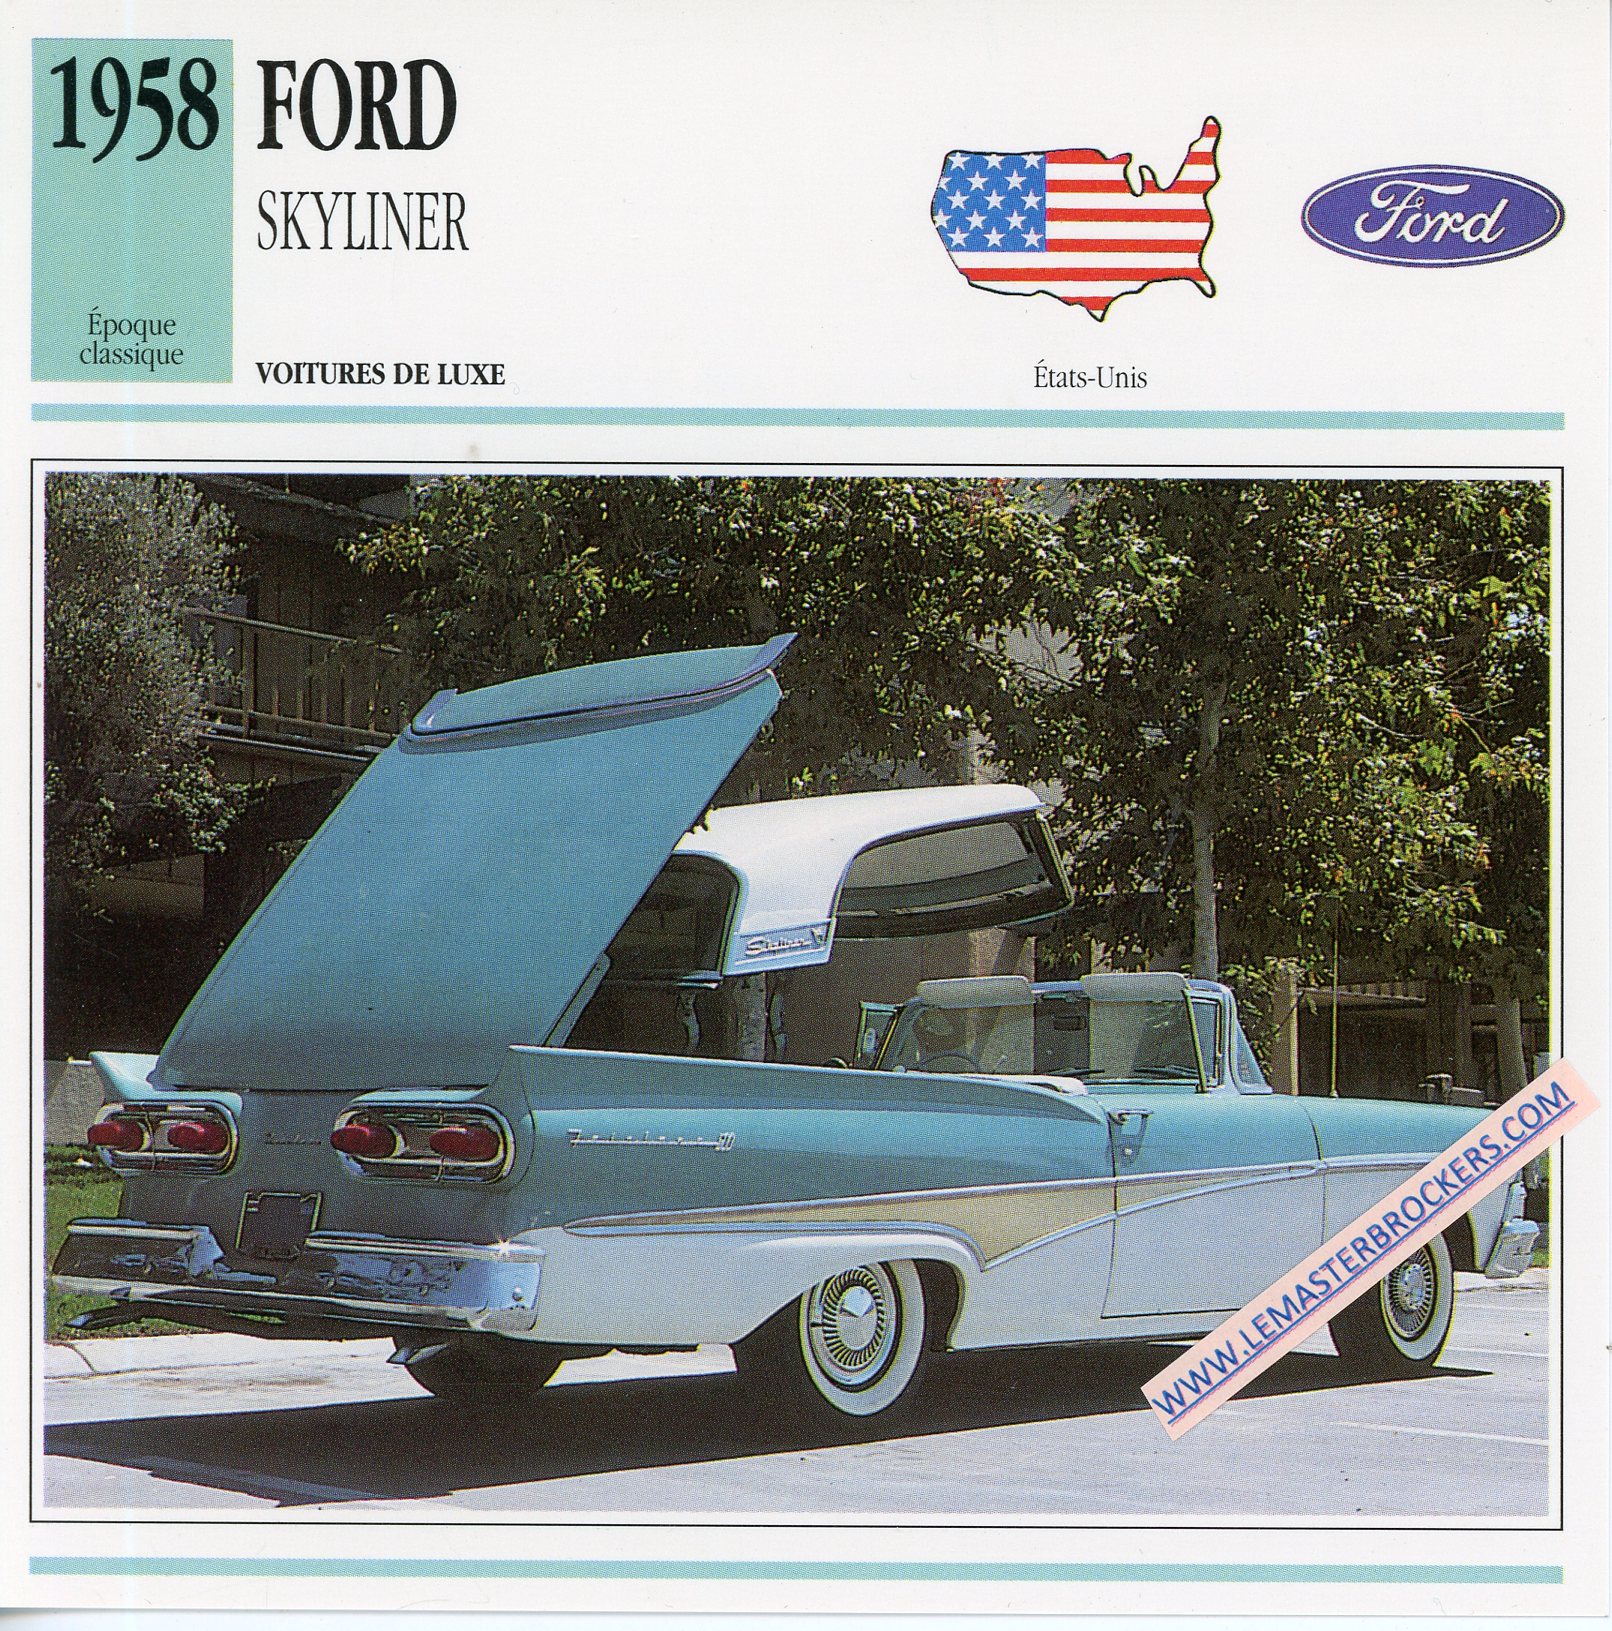 FICHE-AUTO-FORD-SKYLINER-1958-LEMASTERBROCKERS